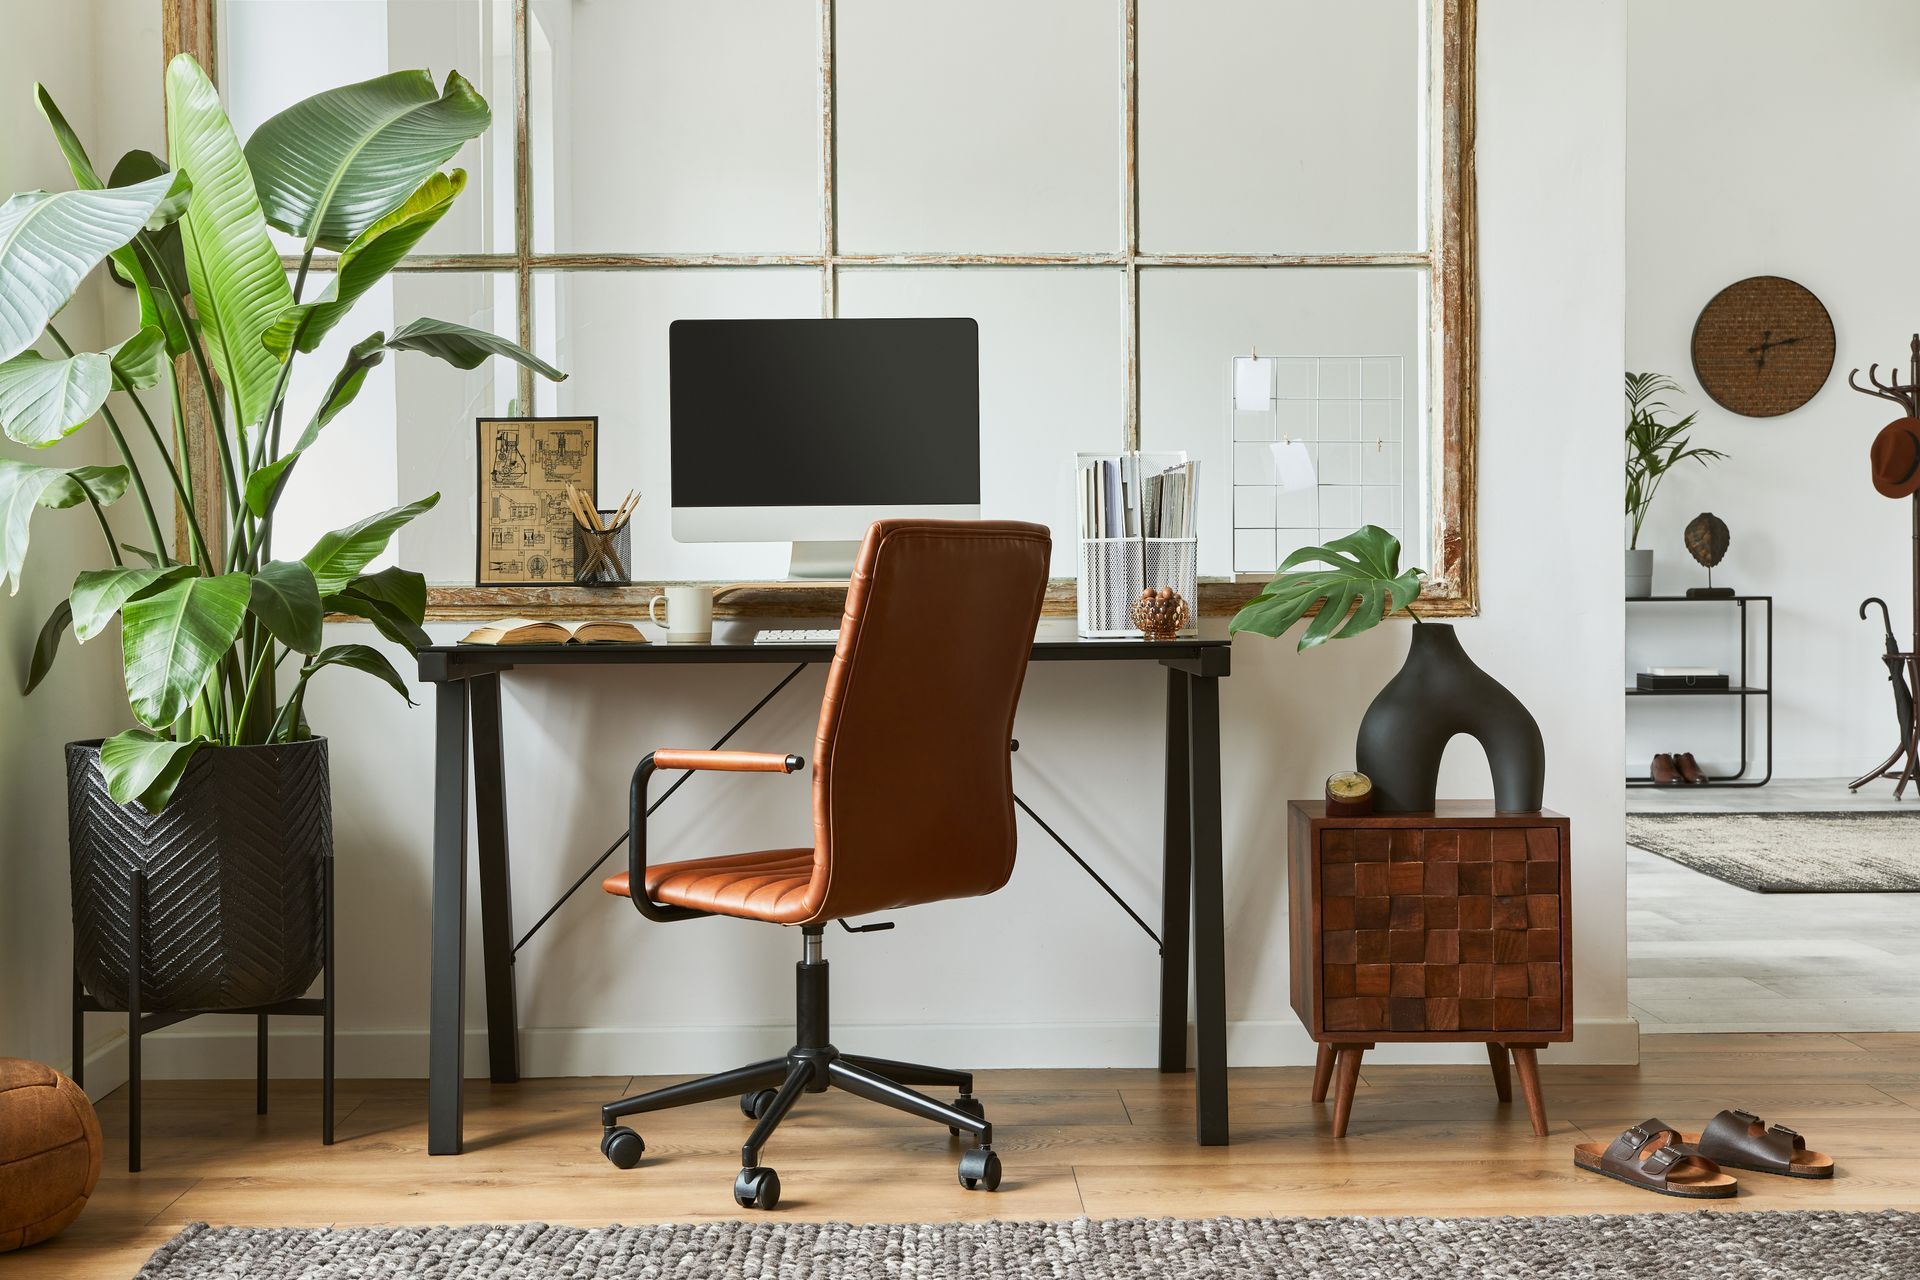 an industrial style office set up, with a desk with metal detailing, a brown leather chair, and a computer on it